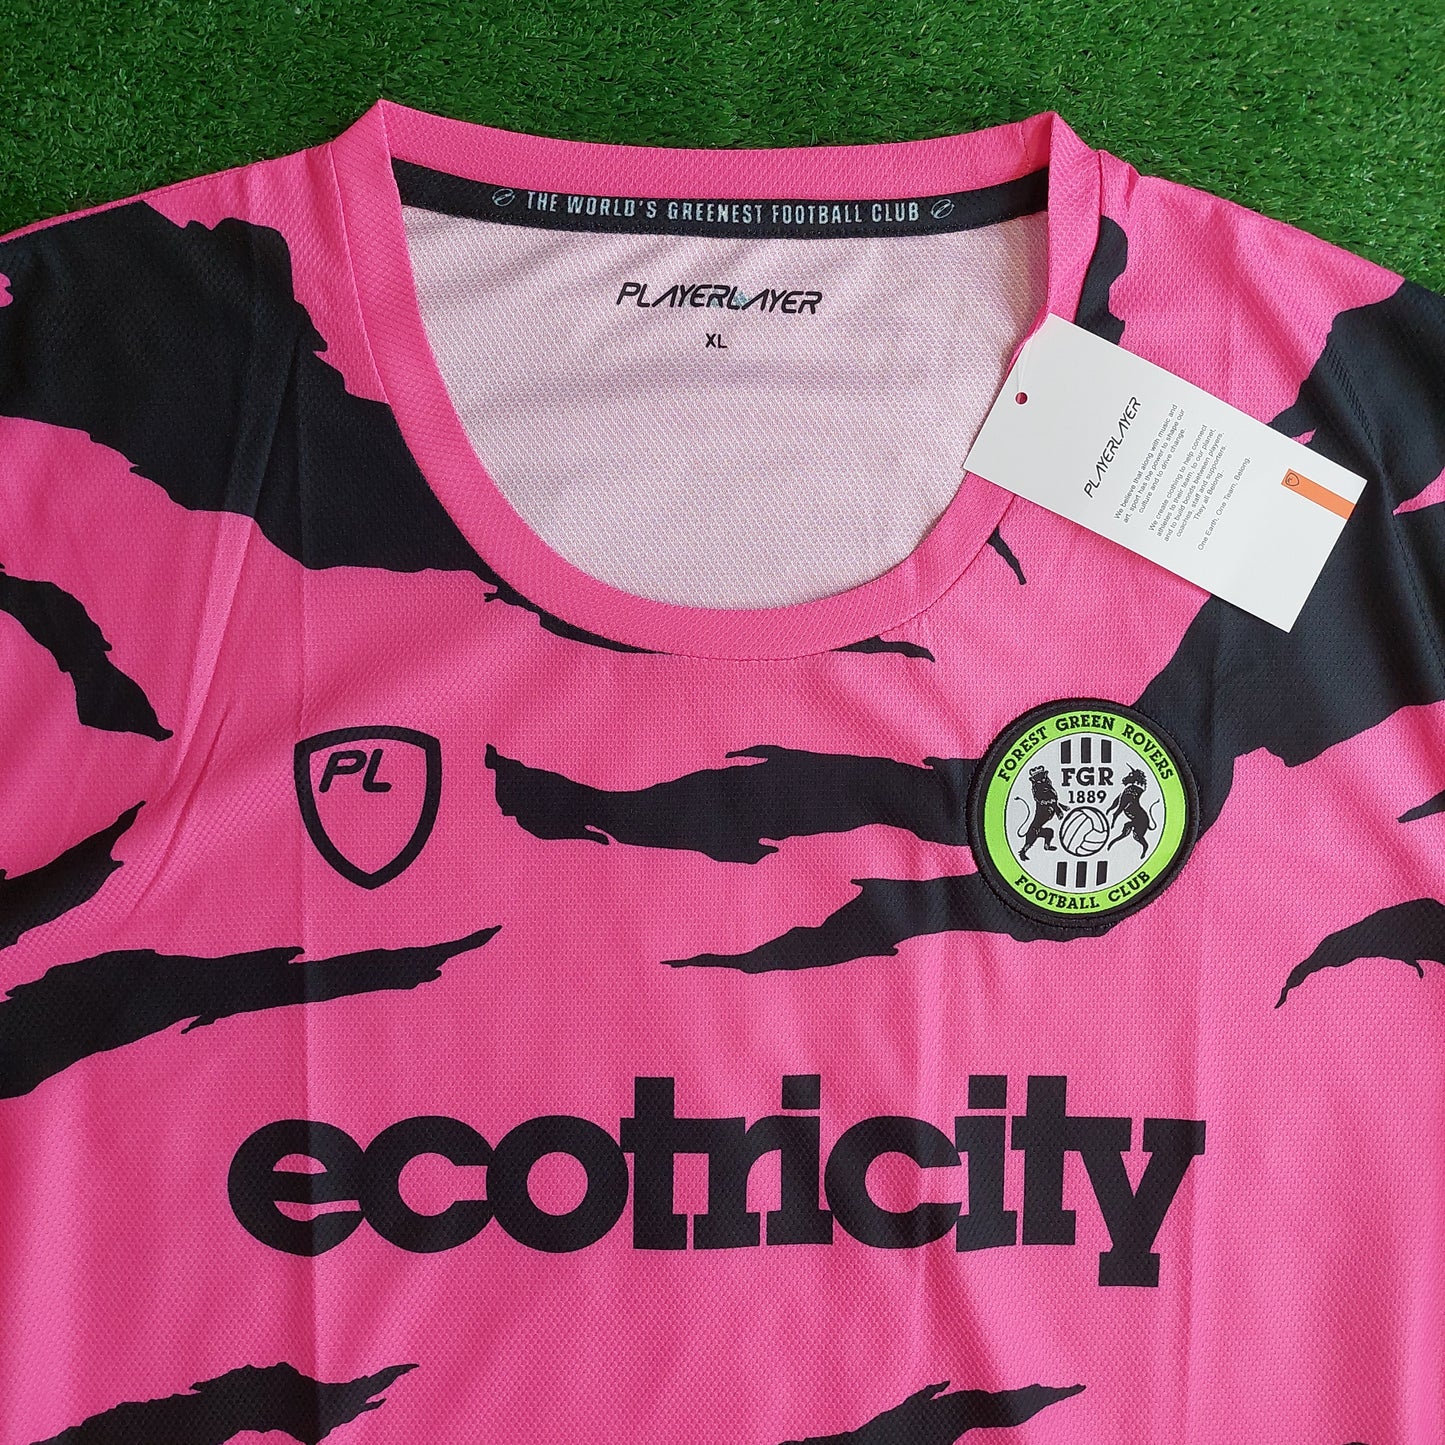 Forest Green Rovers 2022/23 Away Shirt (BNWT) - Multiple Sizes